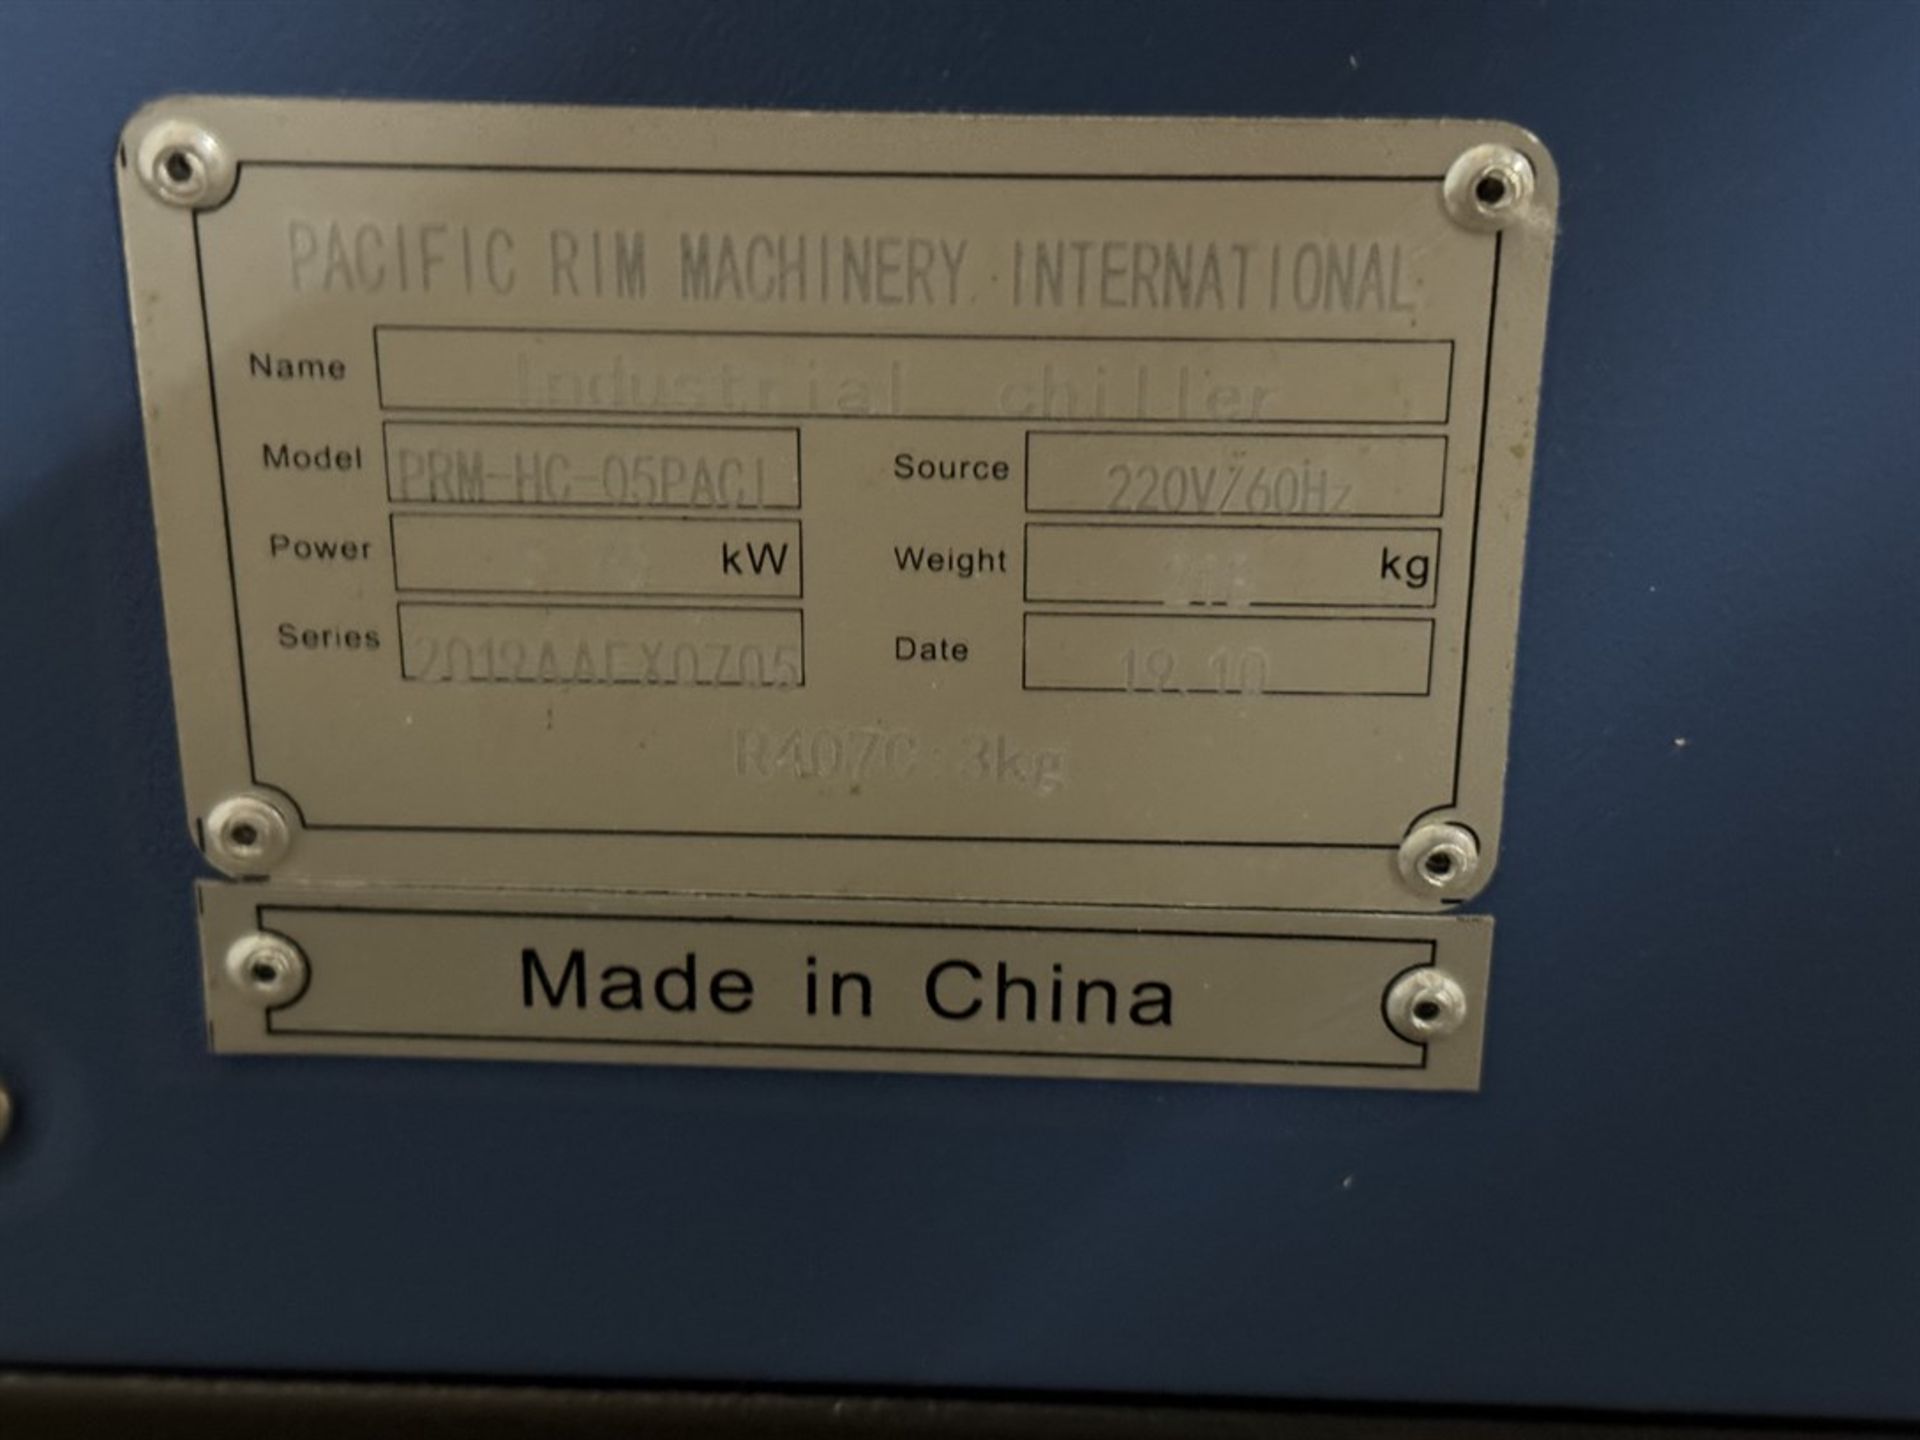 2019 PACIFIC RIM MACHNERY PRM-HC-05PACI 5Ton Chiller, s/n 2019AAFX0705 - Image 5 of 6